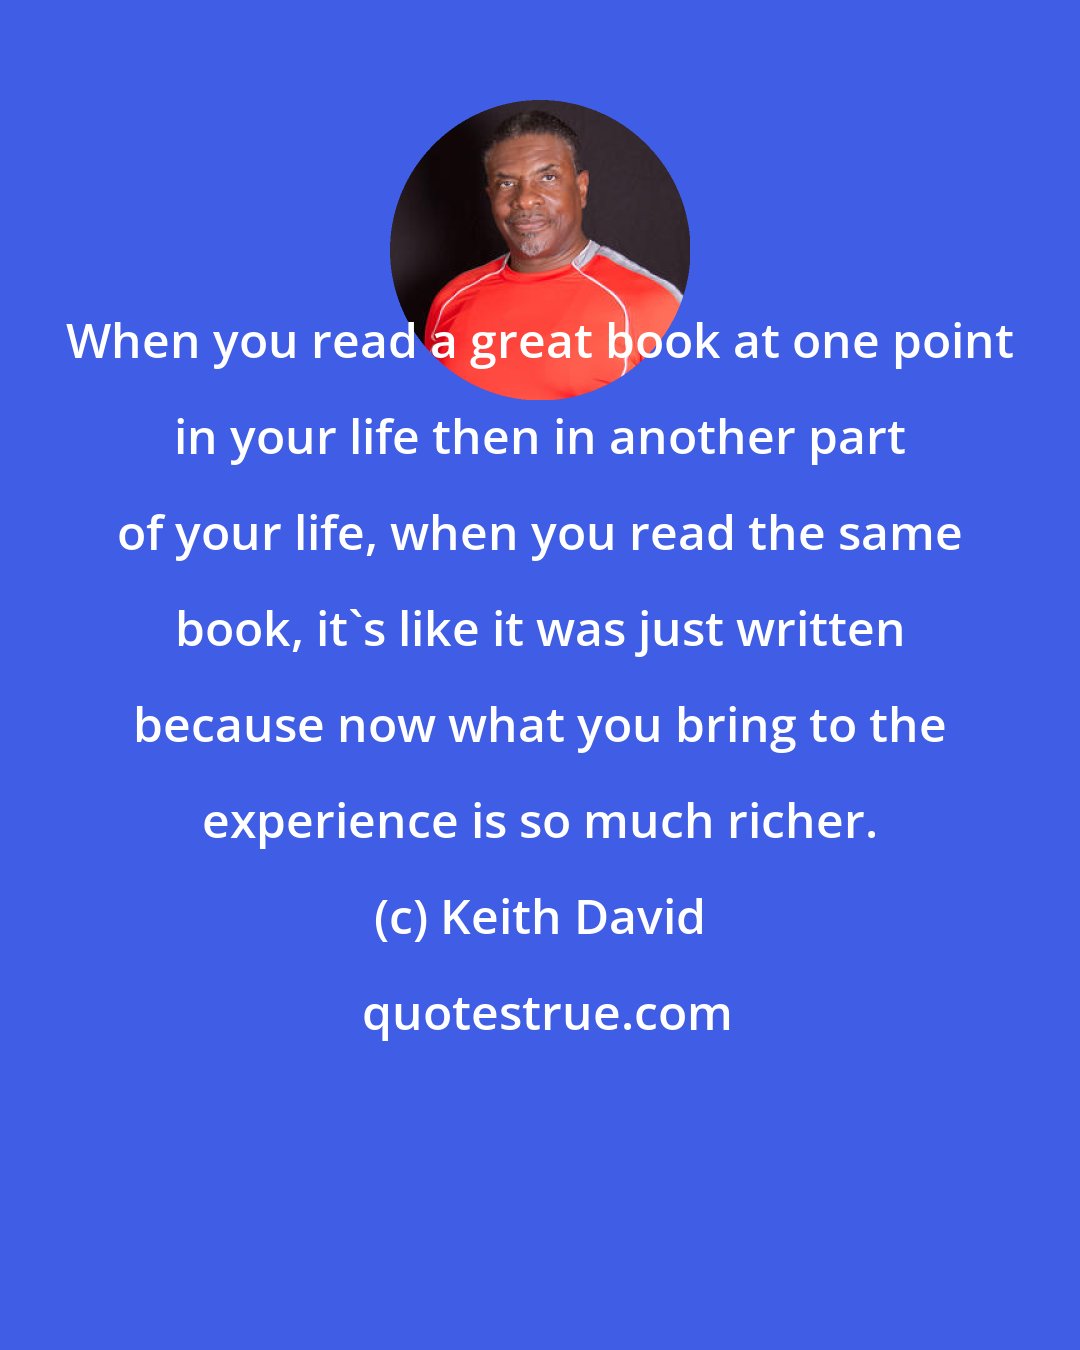 Keith David: When you read a great book at one point in your life then in another part of your life, when you read the same book, it's like it was just written because now what you bring to the experience is so much richer.